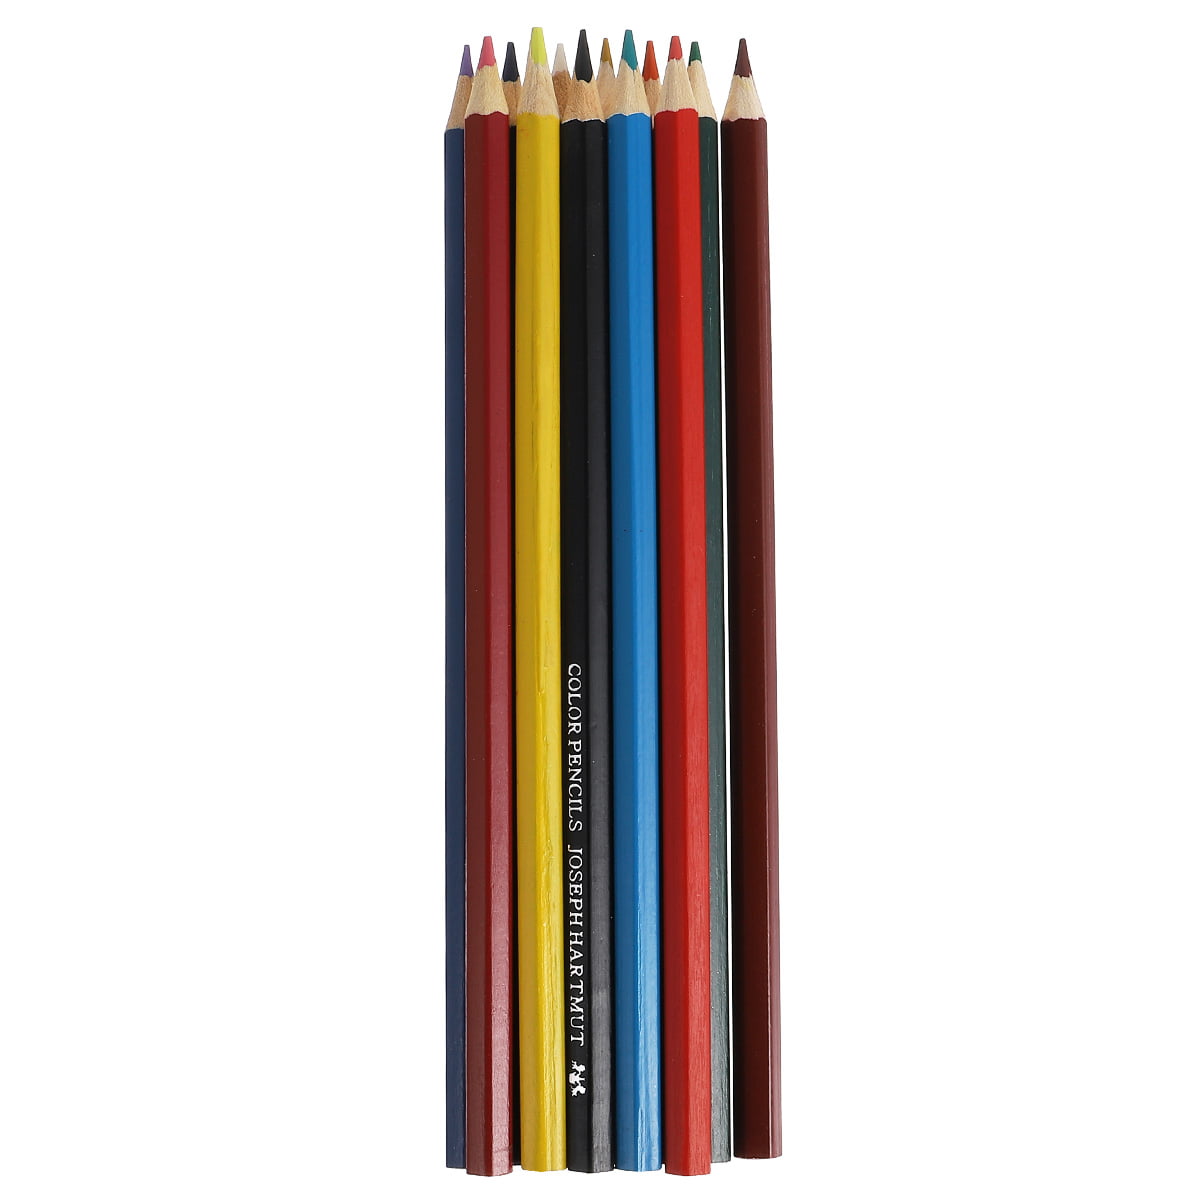 Oil Pencils Wood Colored Pencils,120 Colouring Pencils Square Barrels Pencils for Adult Coloring Books,Sketching, Painting,drawing,christmas Gift,than